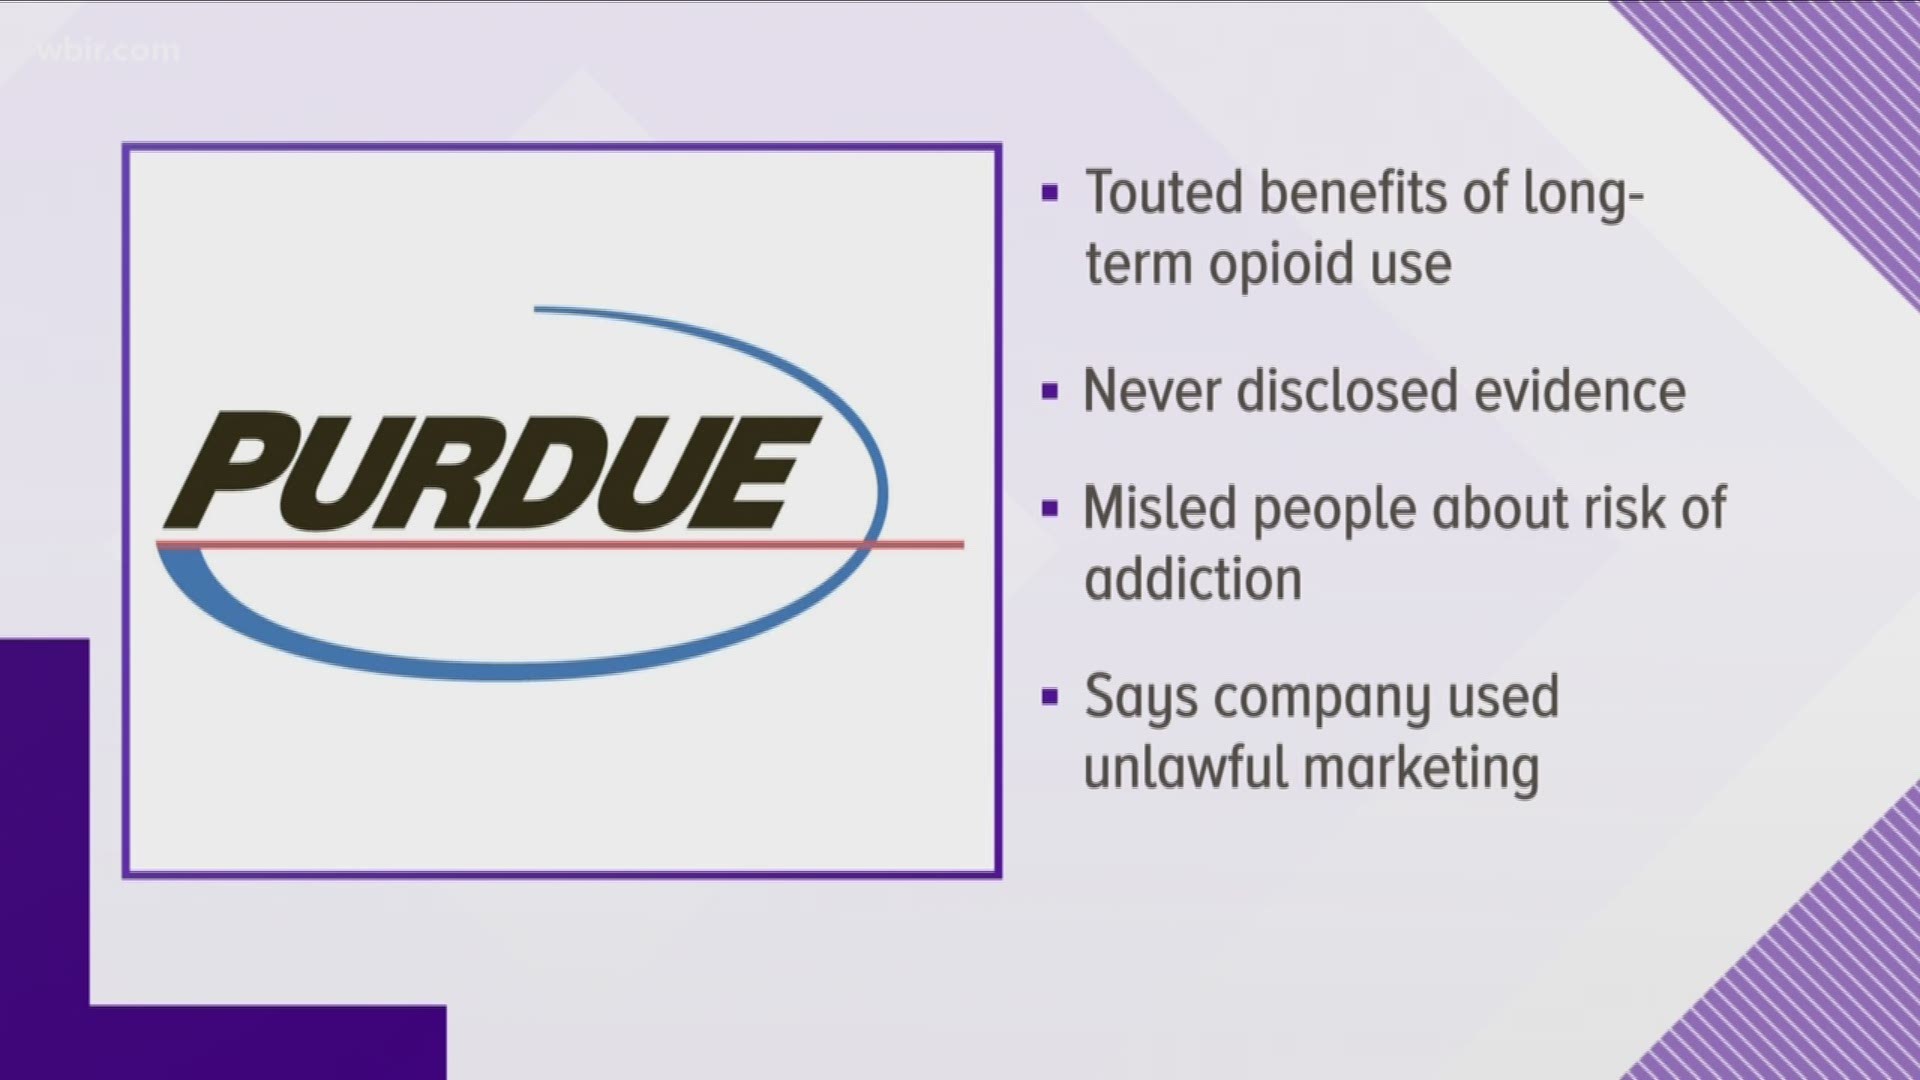 The lawsuit claims that Purdue Pharma created a false narrative that the drugs were safe to increase sales.